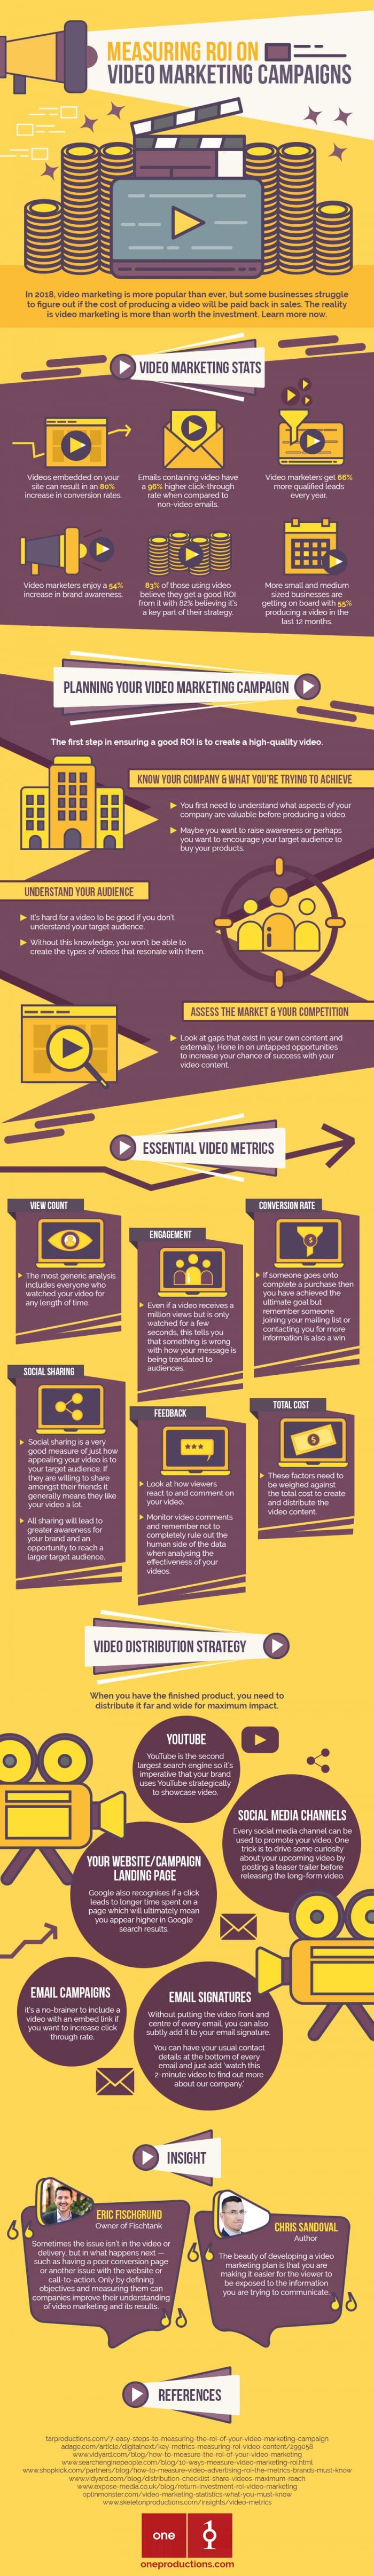 measuring-roi-on-video-marketing-campaigns-infographic